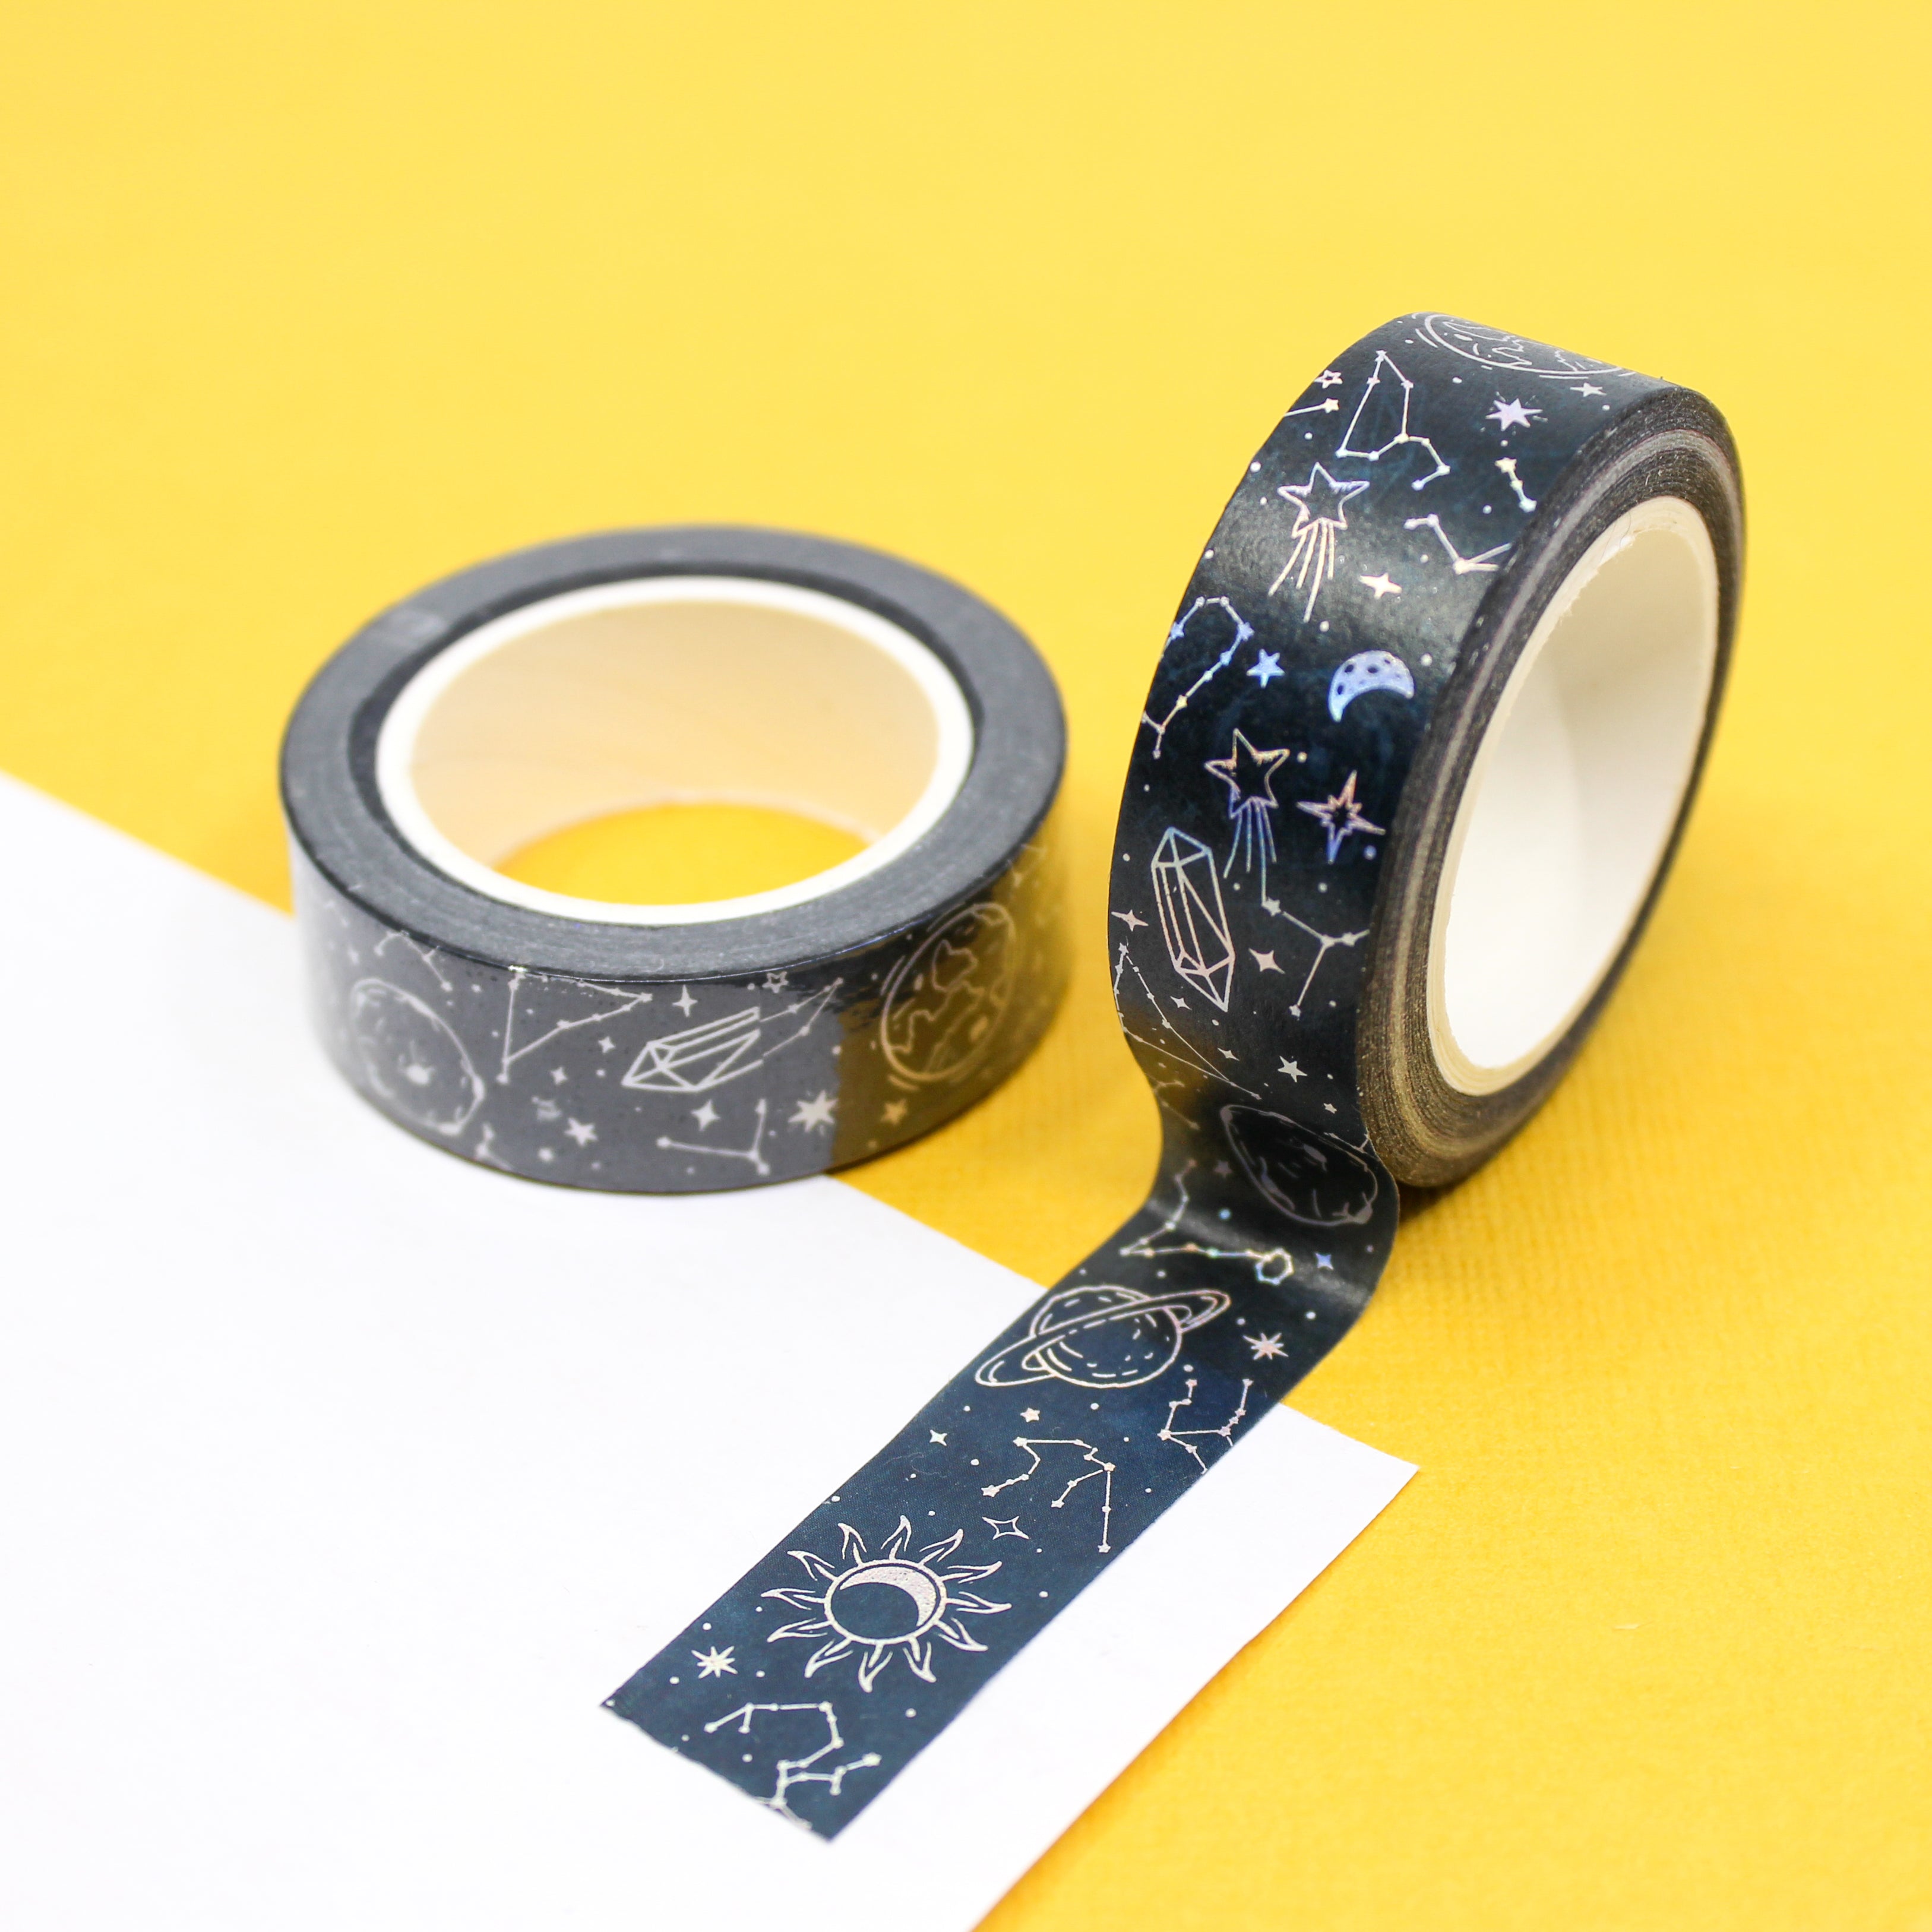 This is a collection of celestial symbols view themed washi tape from BBB Supplies Craft Shop